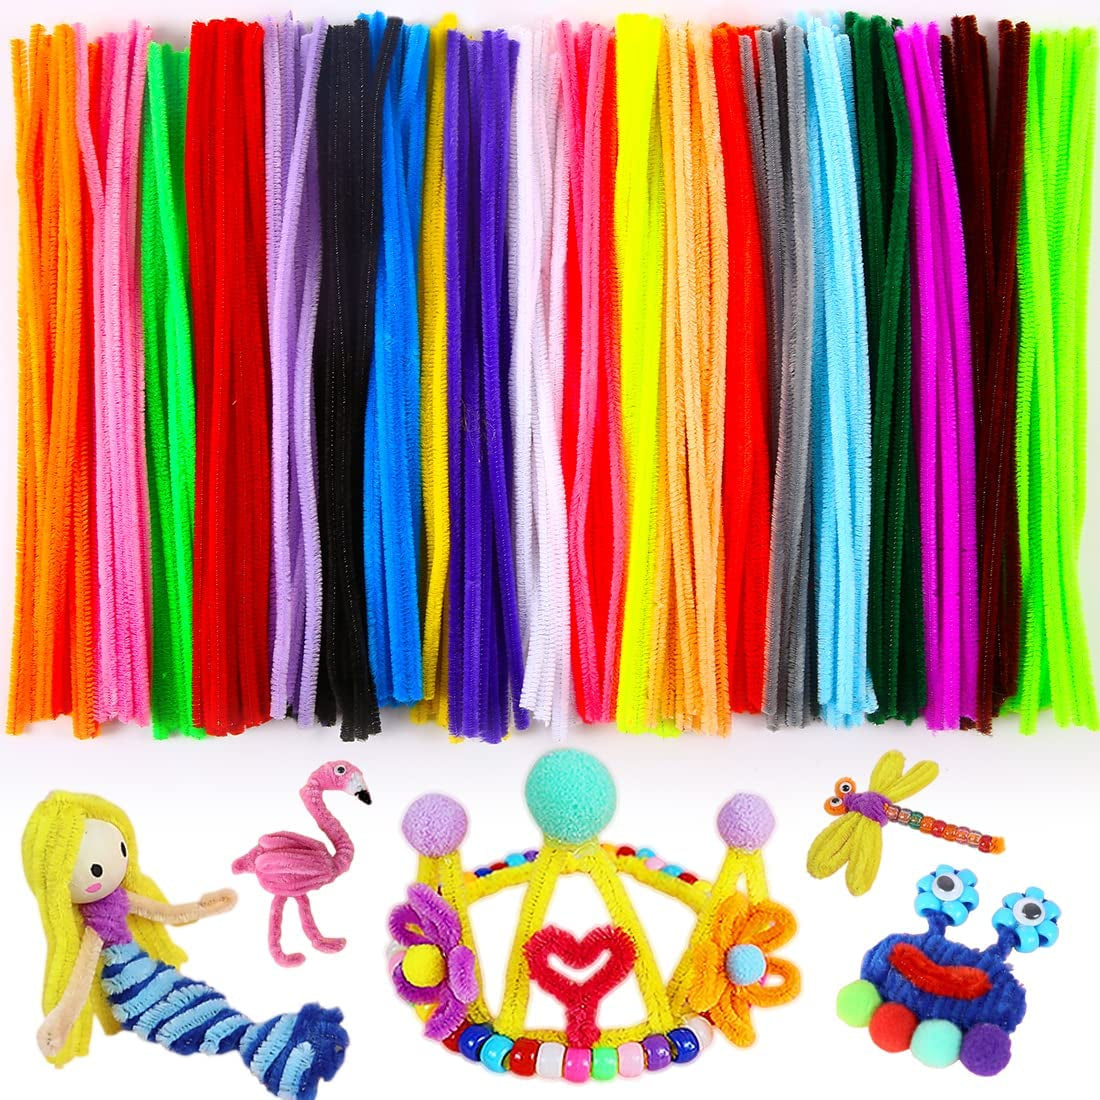 Pipe Cleaners, Pipe Cleaners Craft, Arts and Crafts, Crafts, Craft Supplies, Art Supplies (Orange)…